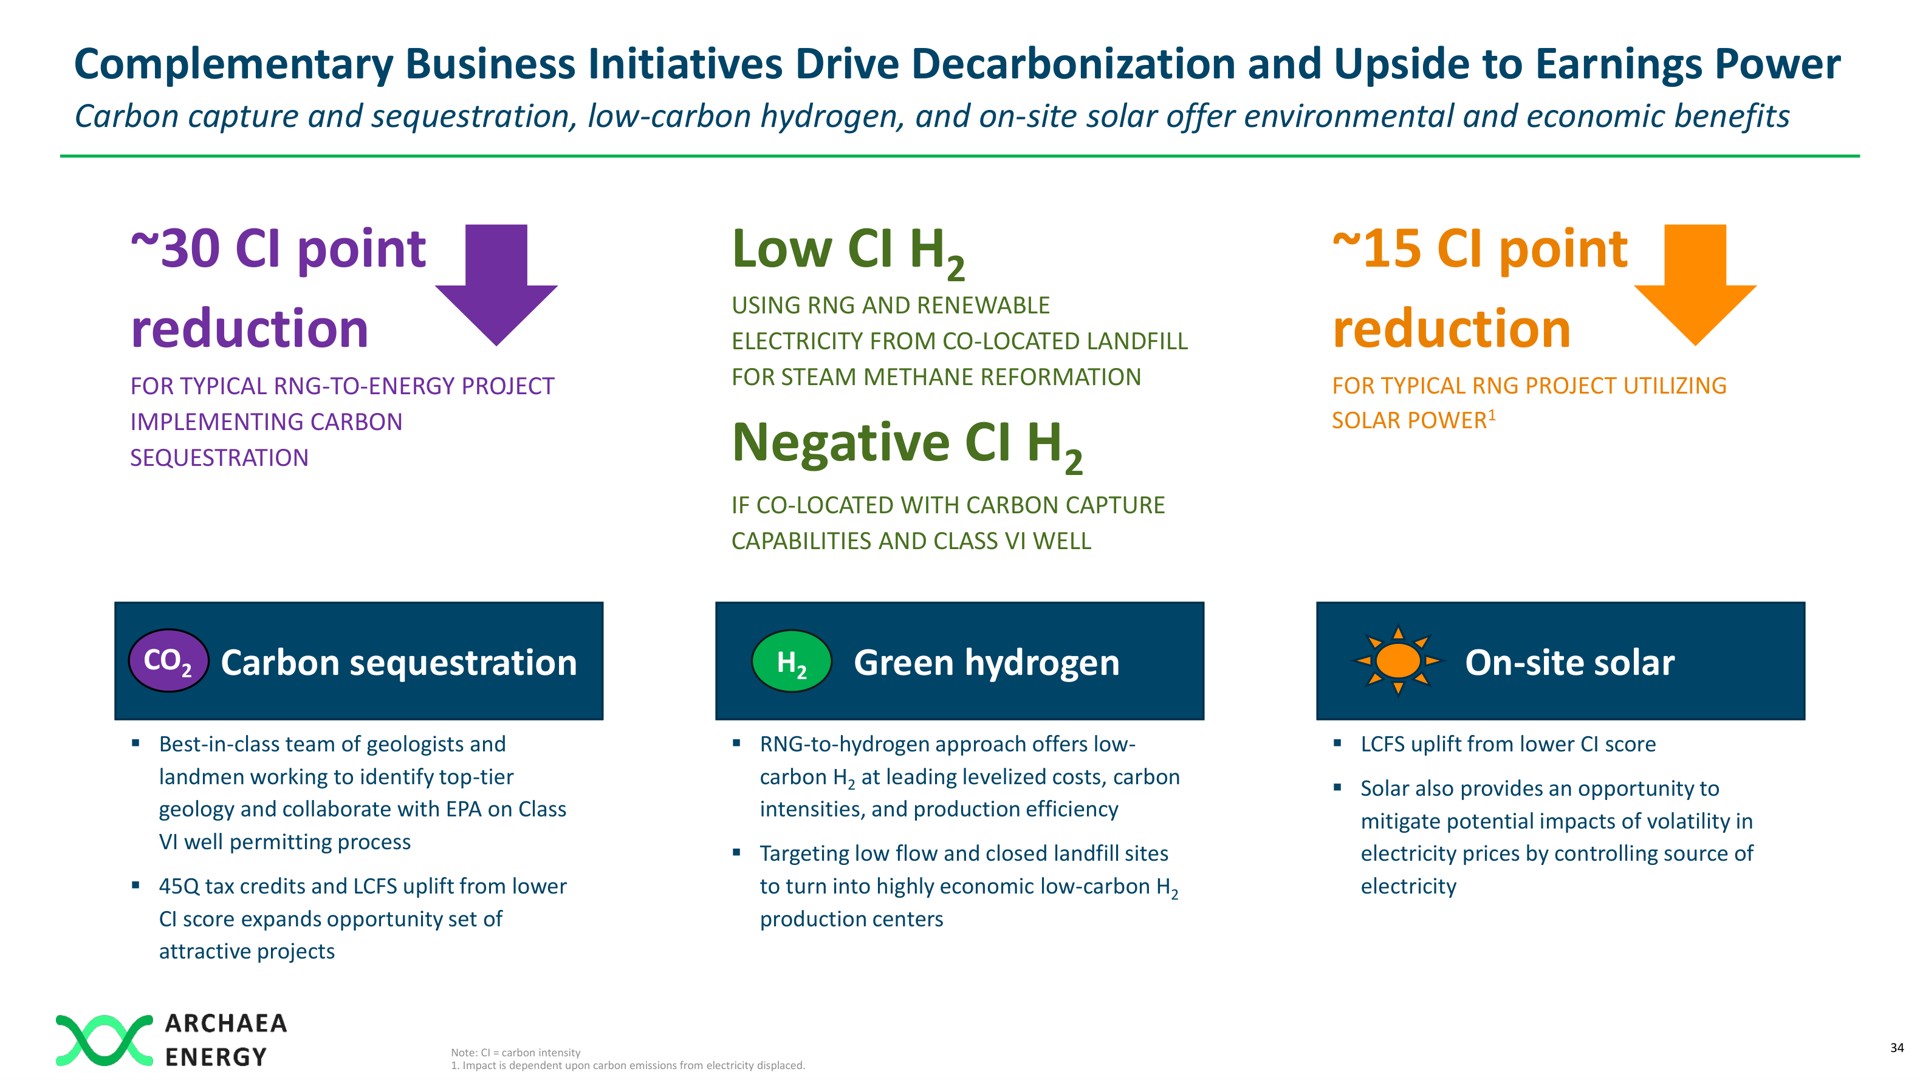 complementary business initiatives drive decarbonization and upside to earnings power point reduction low negative point reduction solar carbon sequestration | Archaea Energy